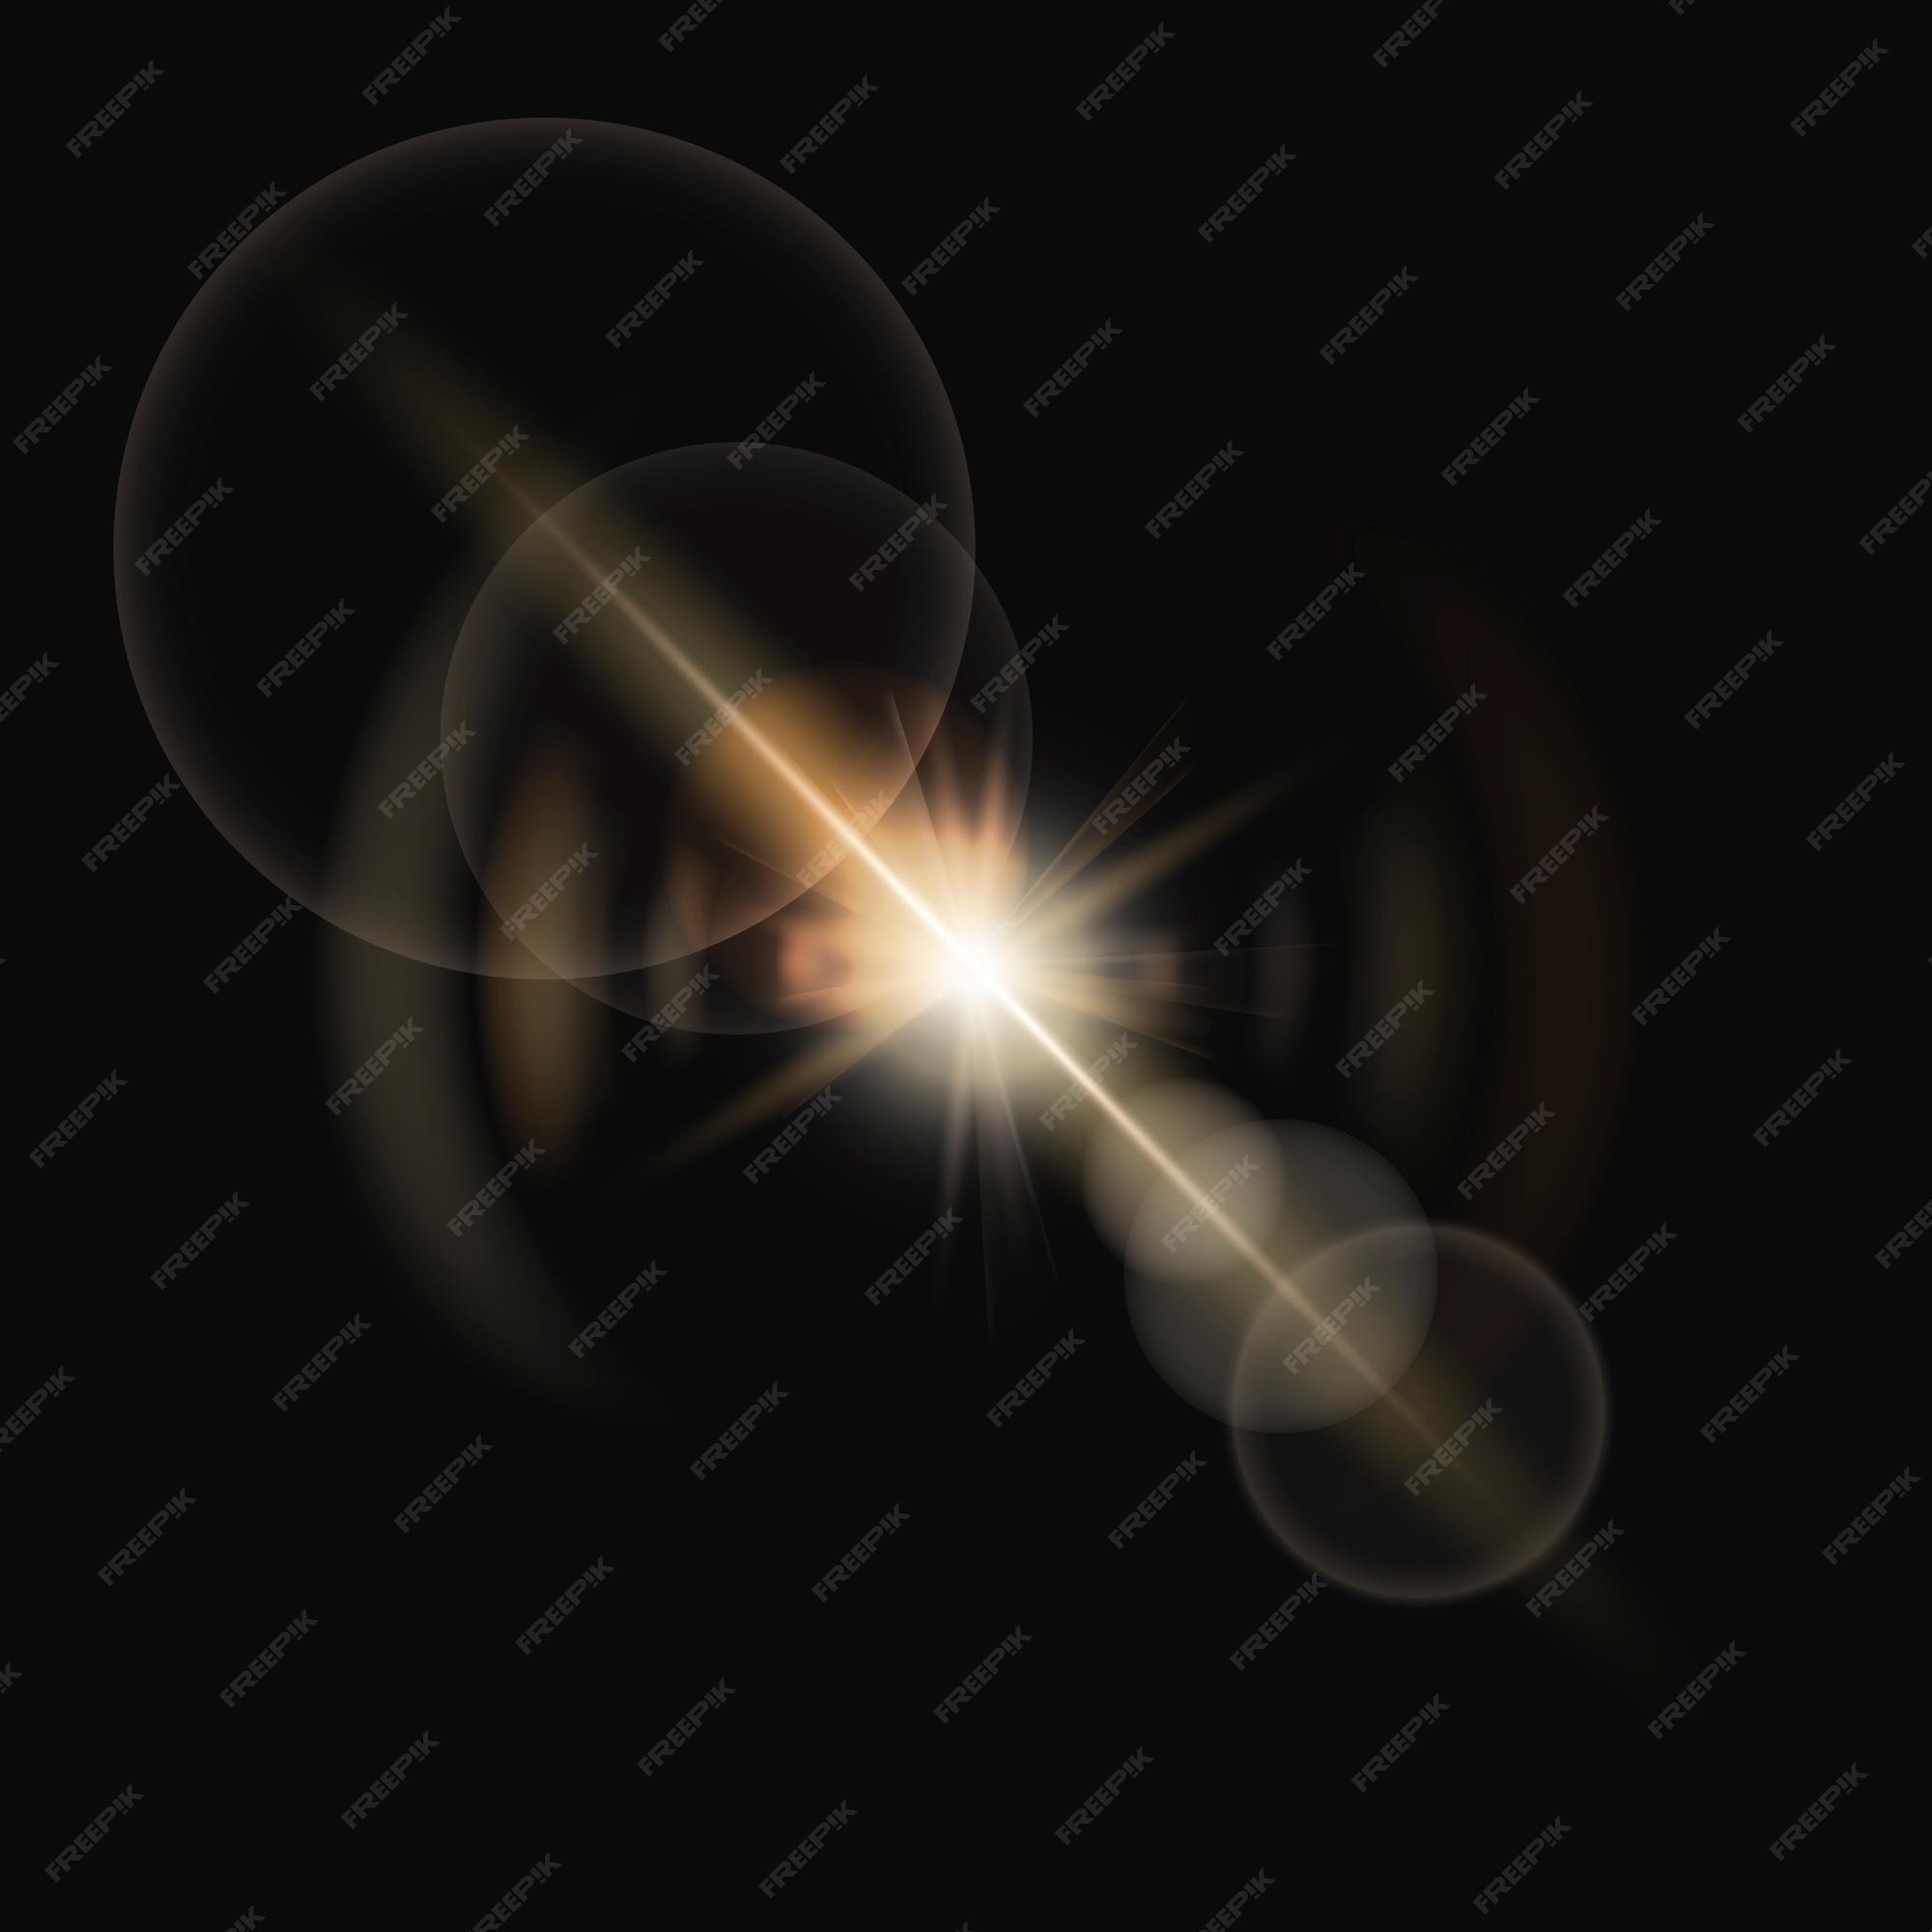 Free | lens flare vector with ring ghost effect